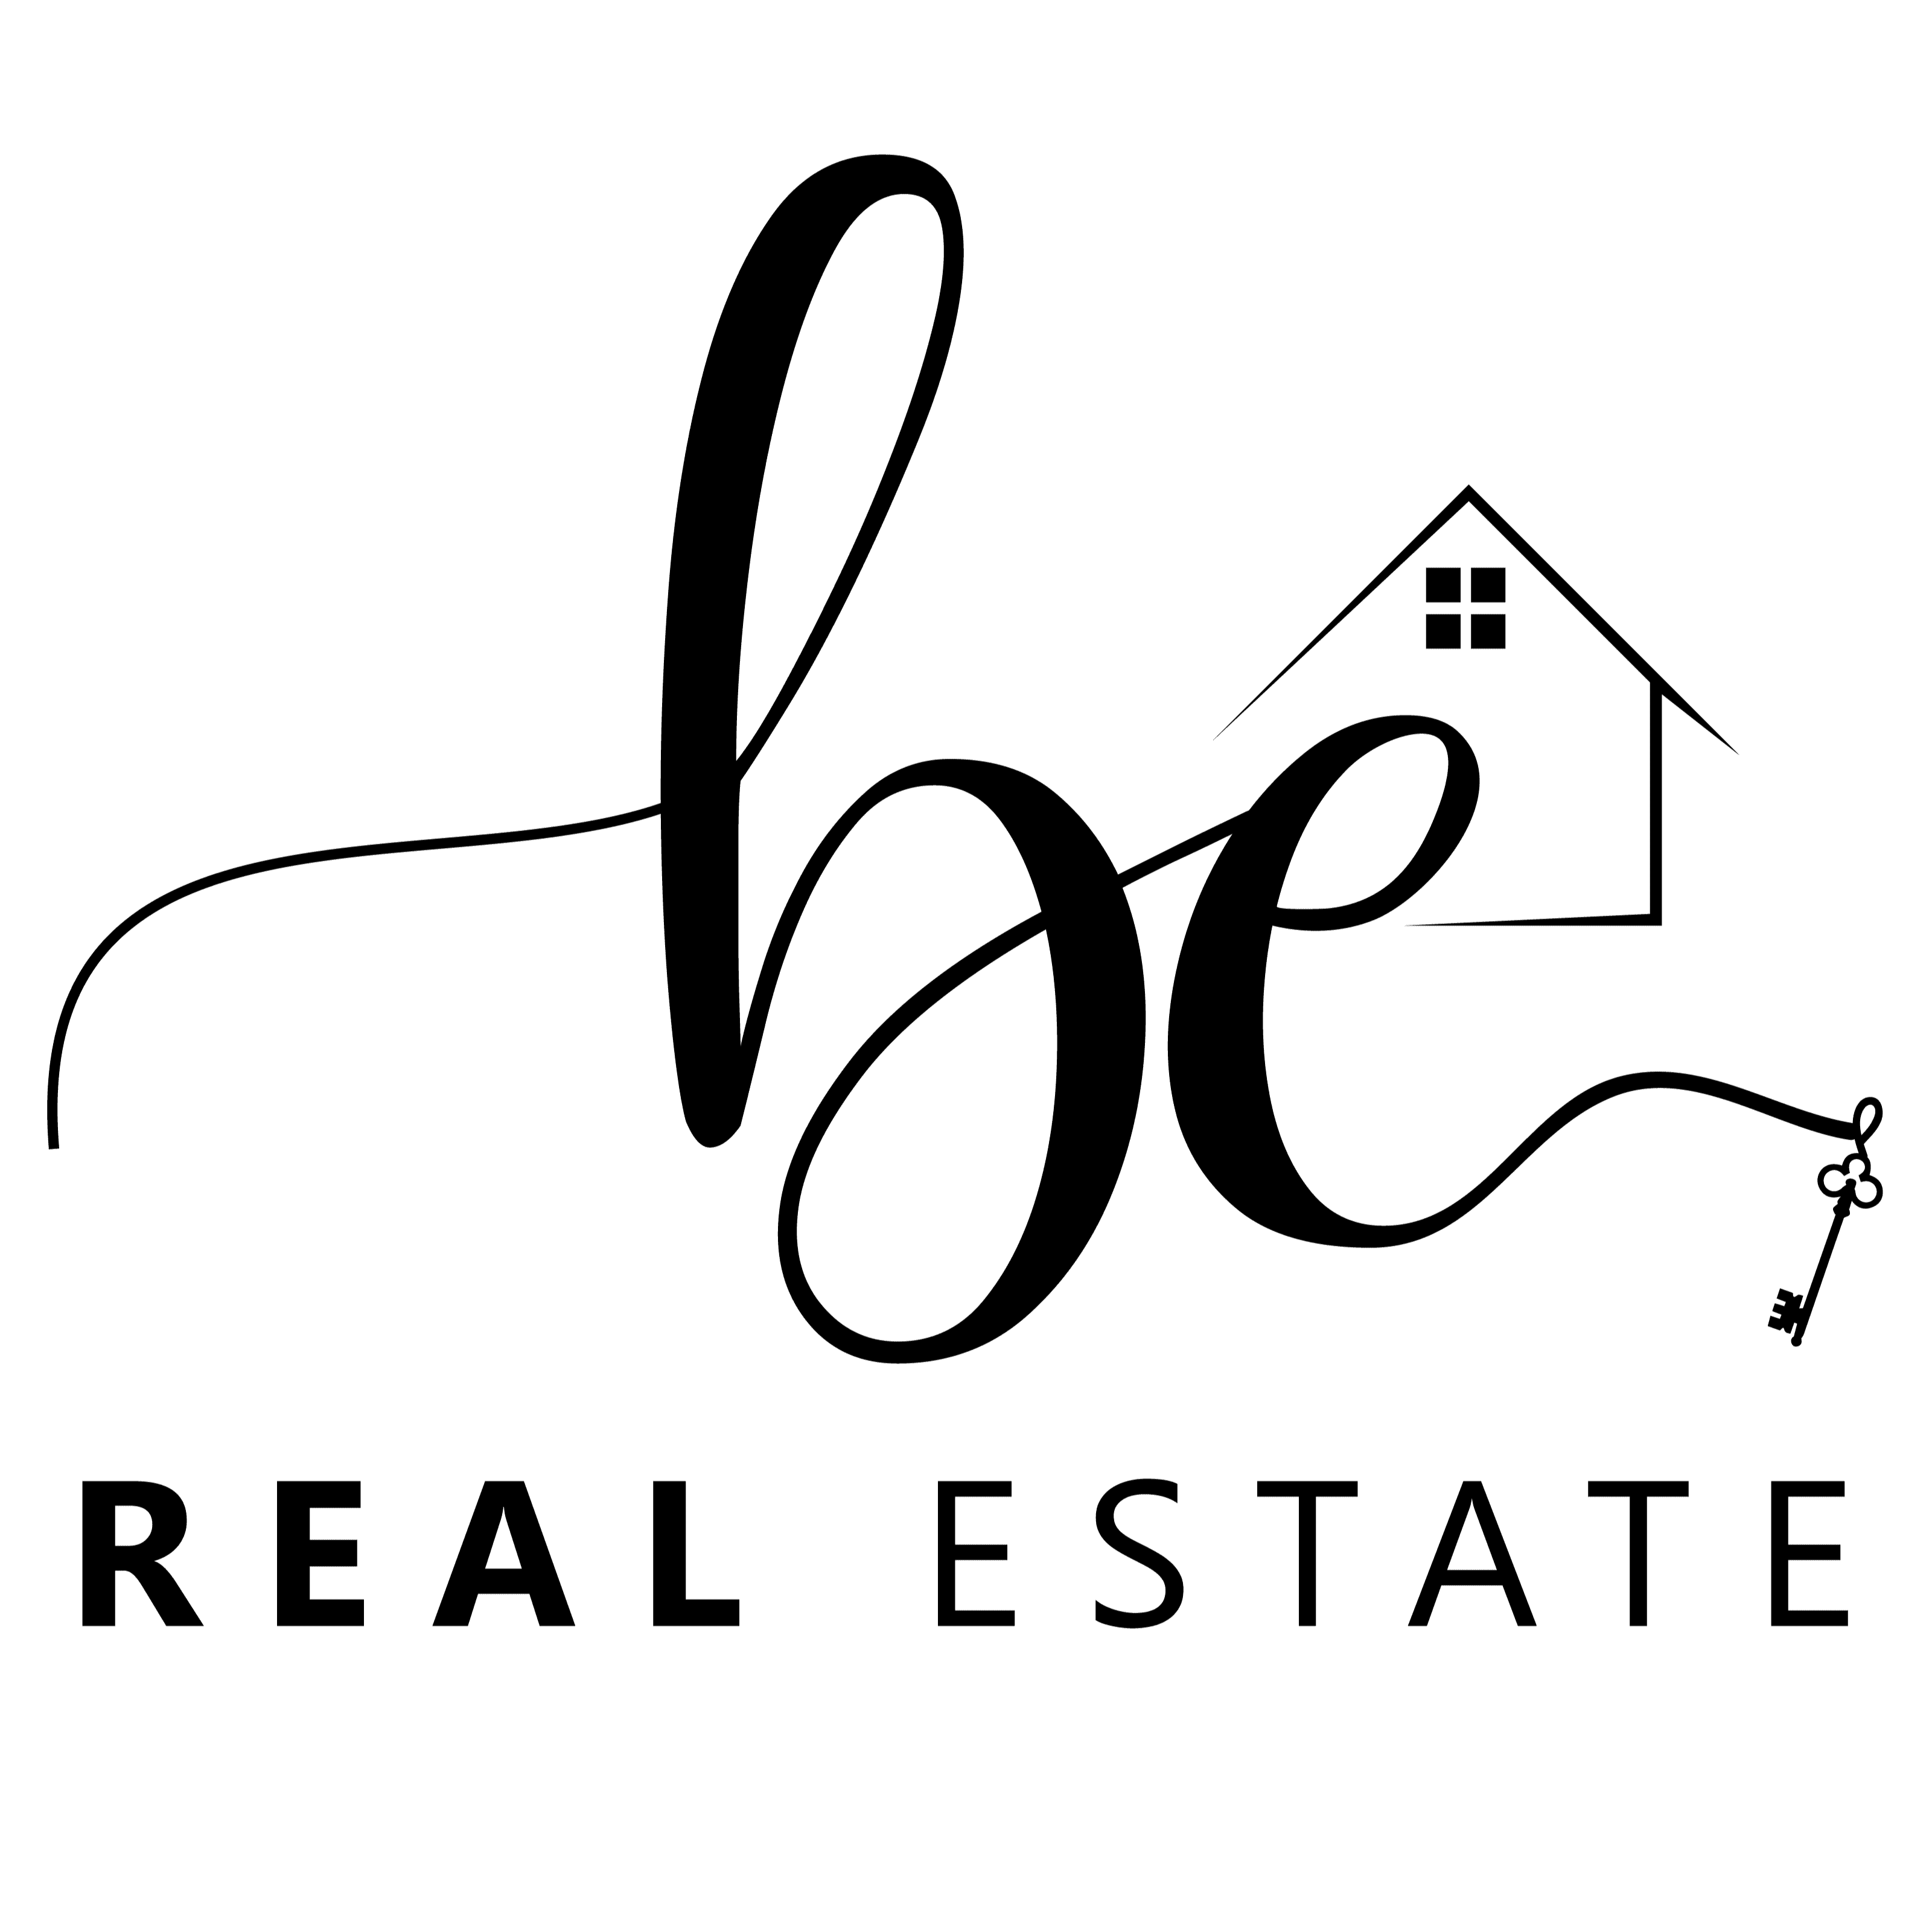 Be REAL Estate